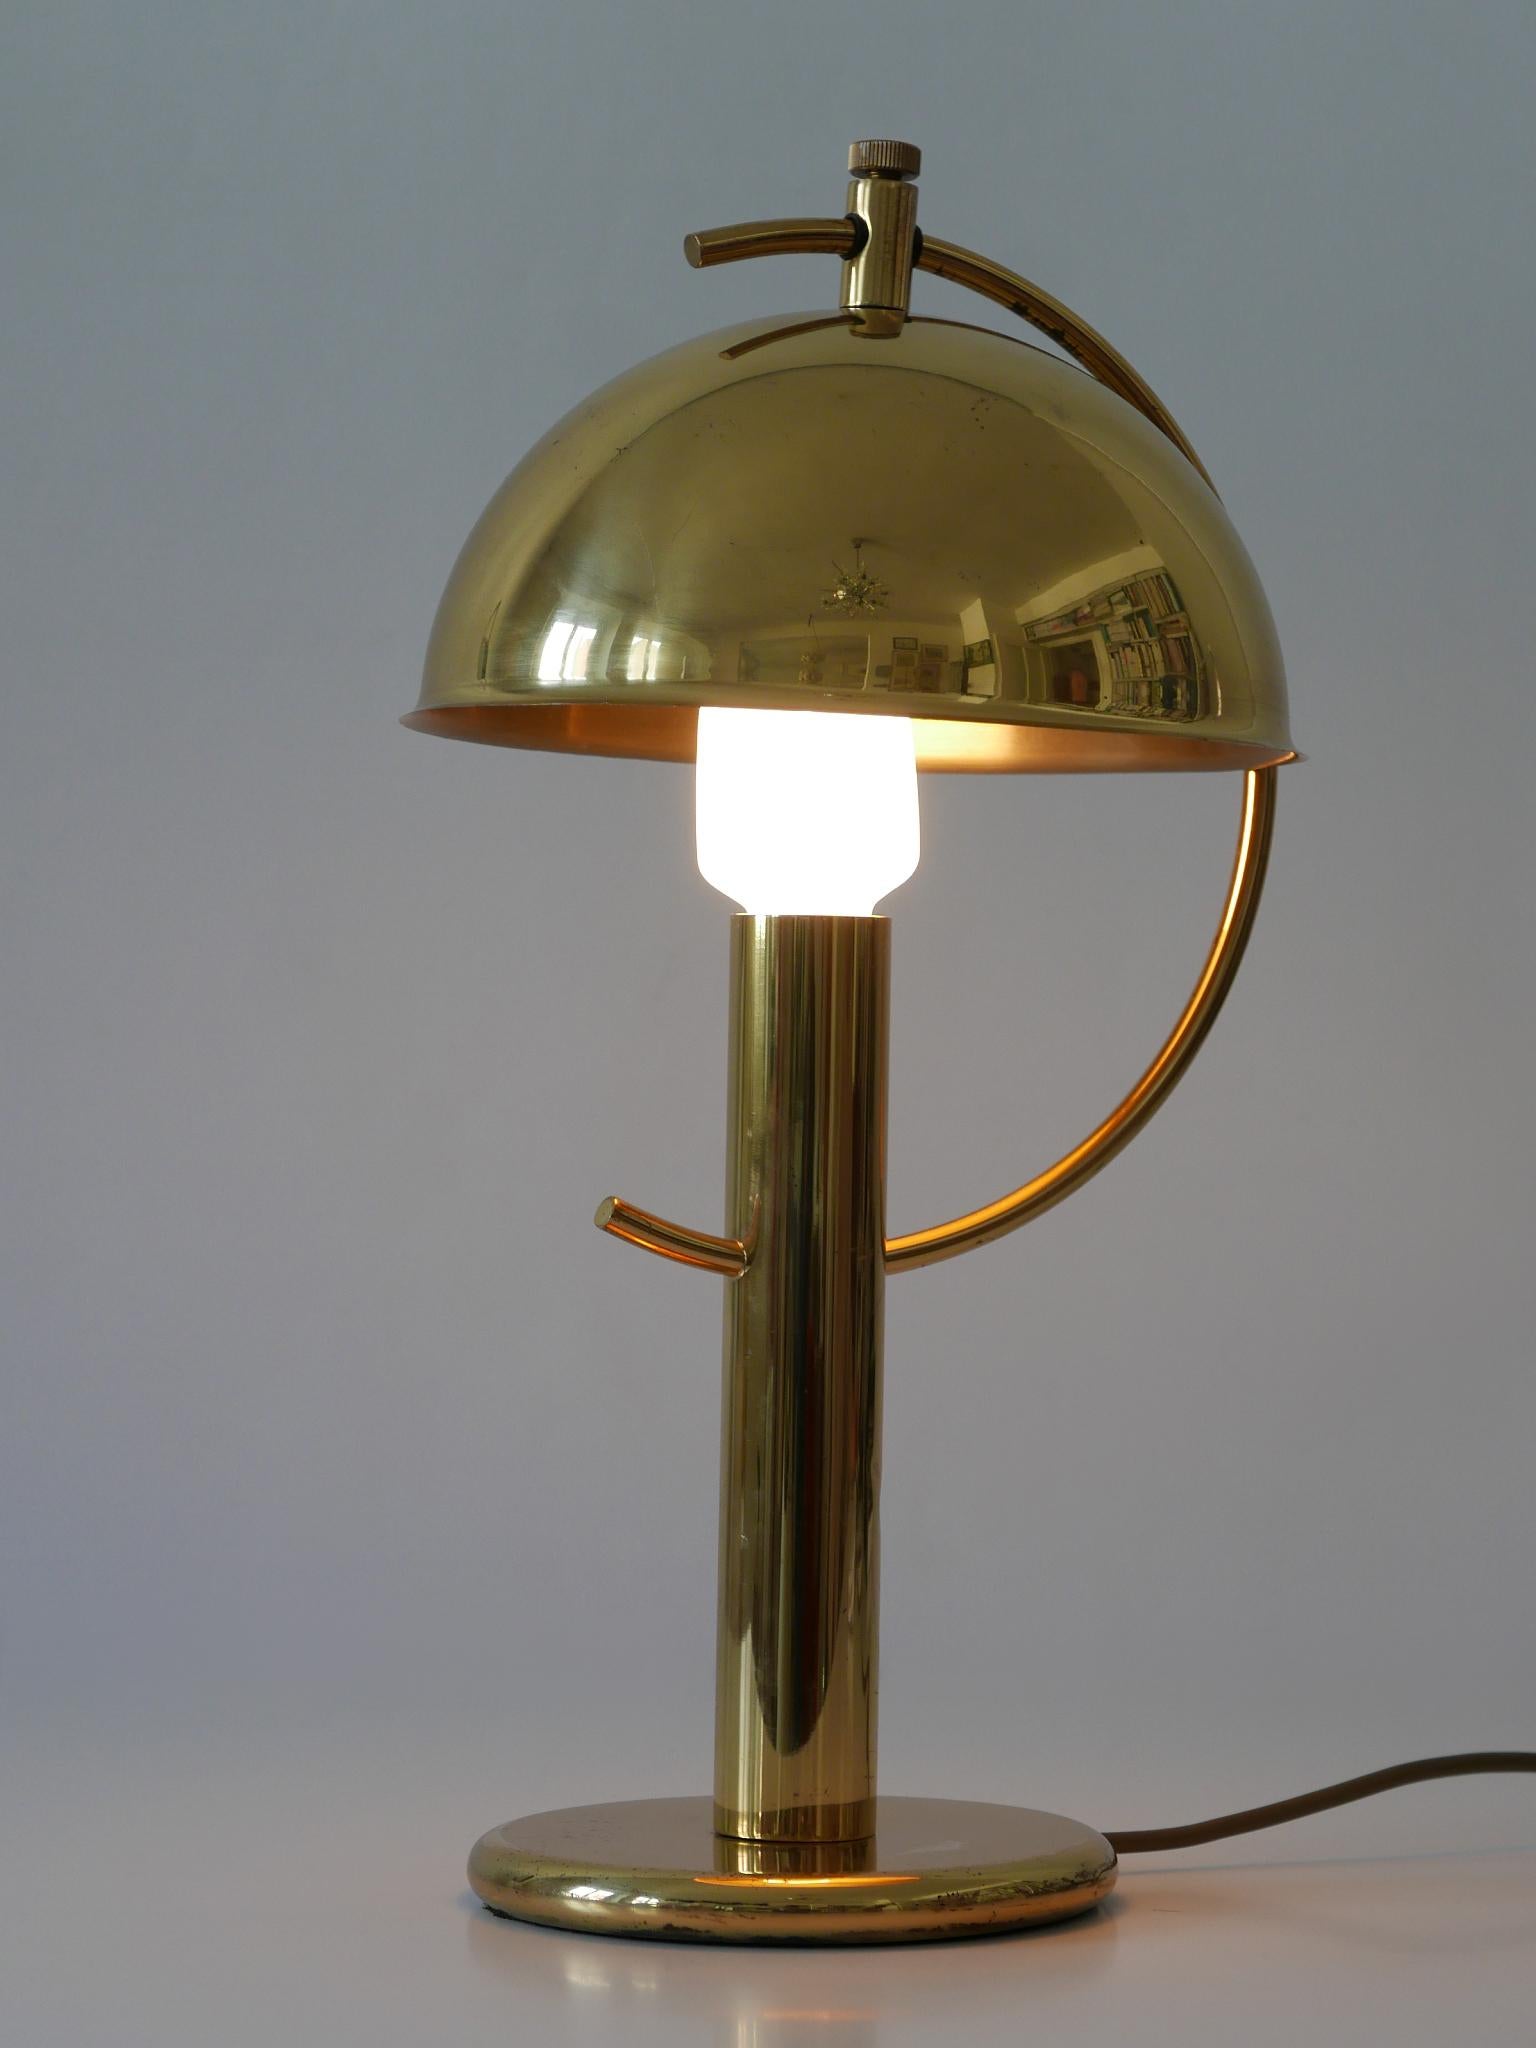 Mid-20th Century Exceptional Mid-Century Modern Brass Table Lamp by Gebrüder Cosack Germany 1960s For Sale